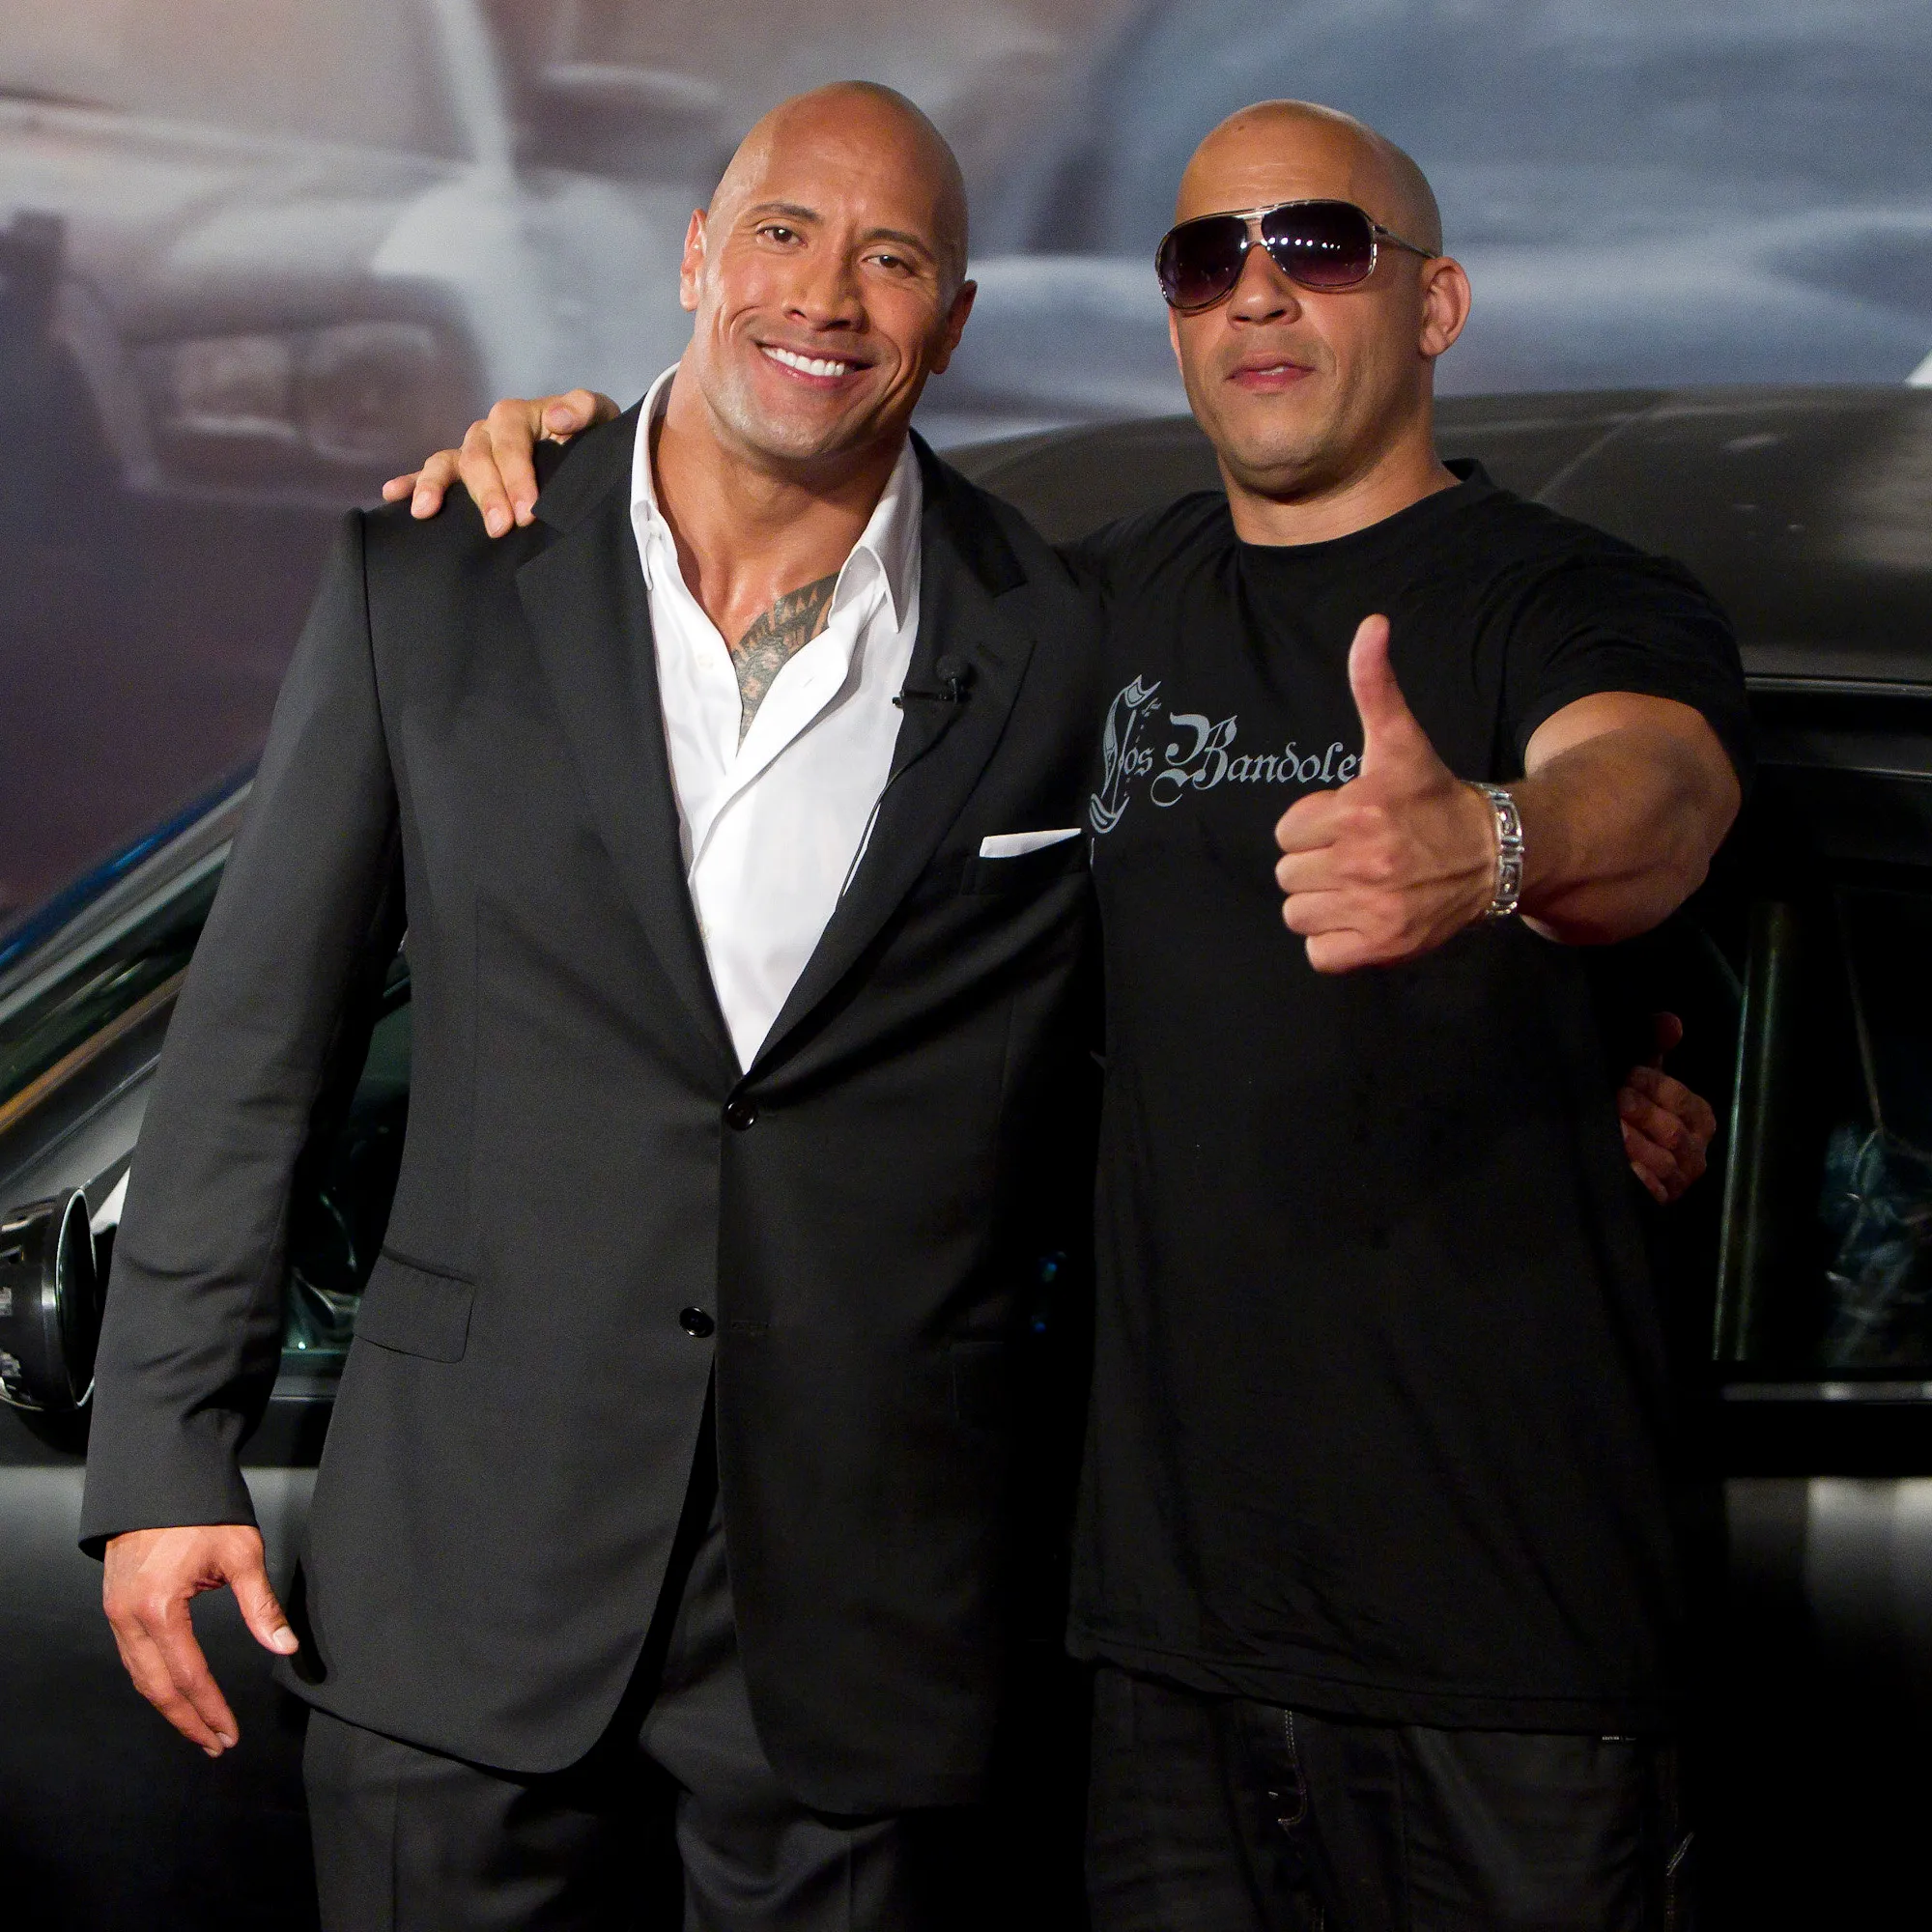 Fast and Furious star, Vin Diesel faces Sexual Assault allegations